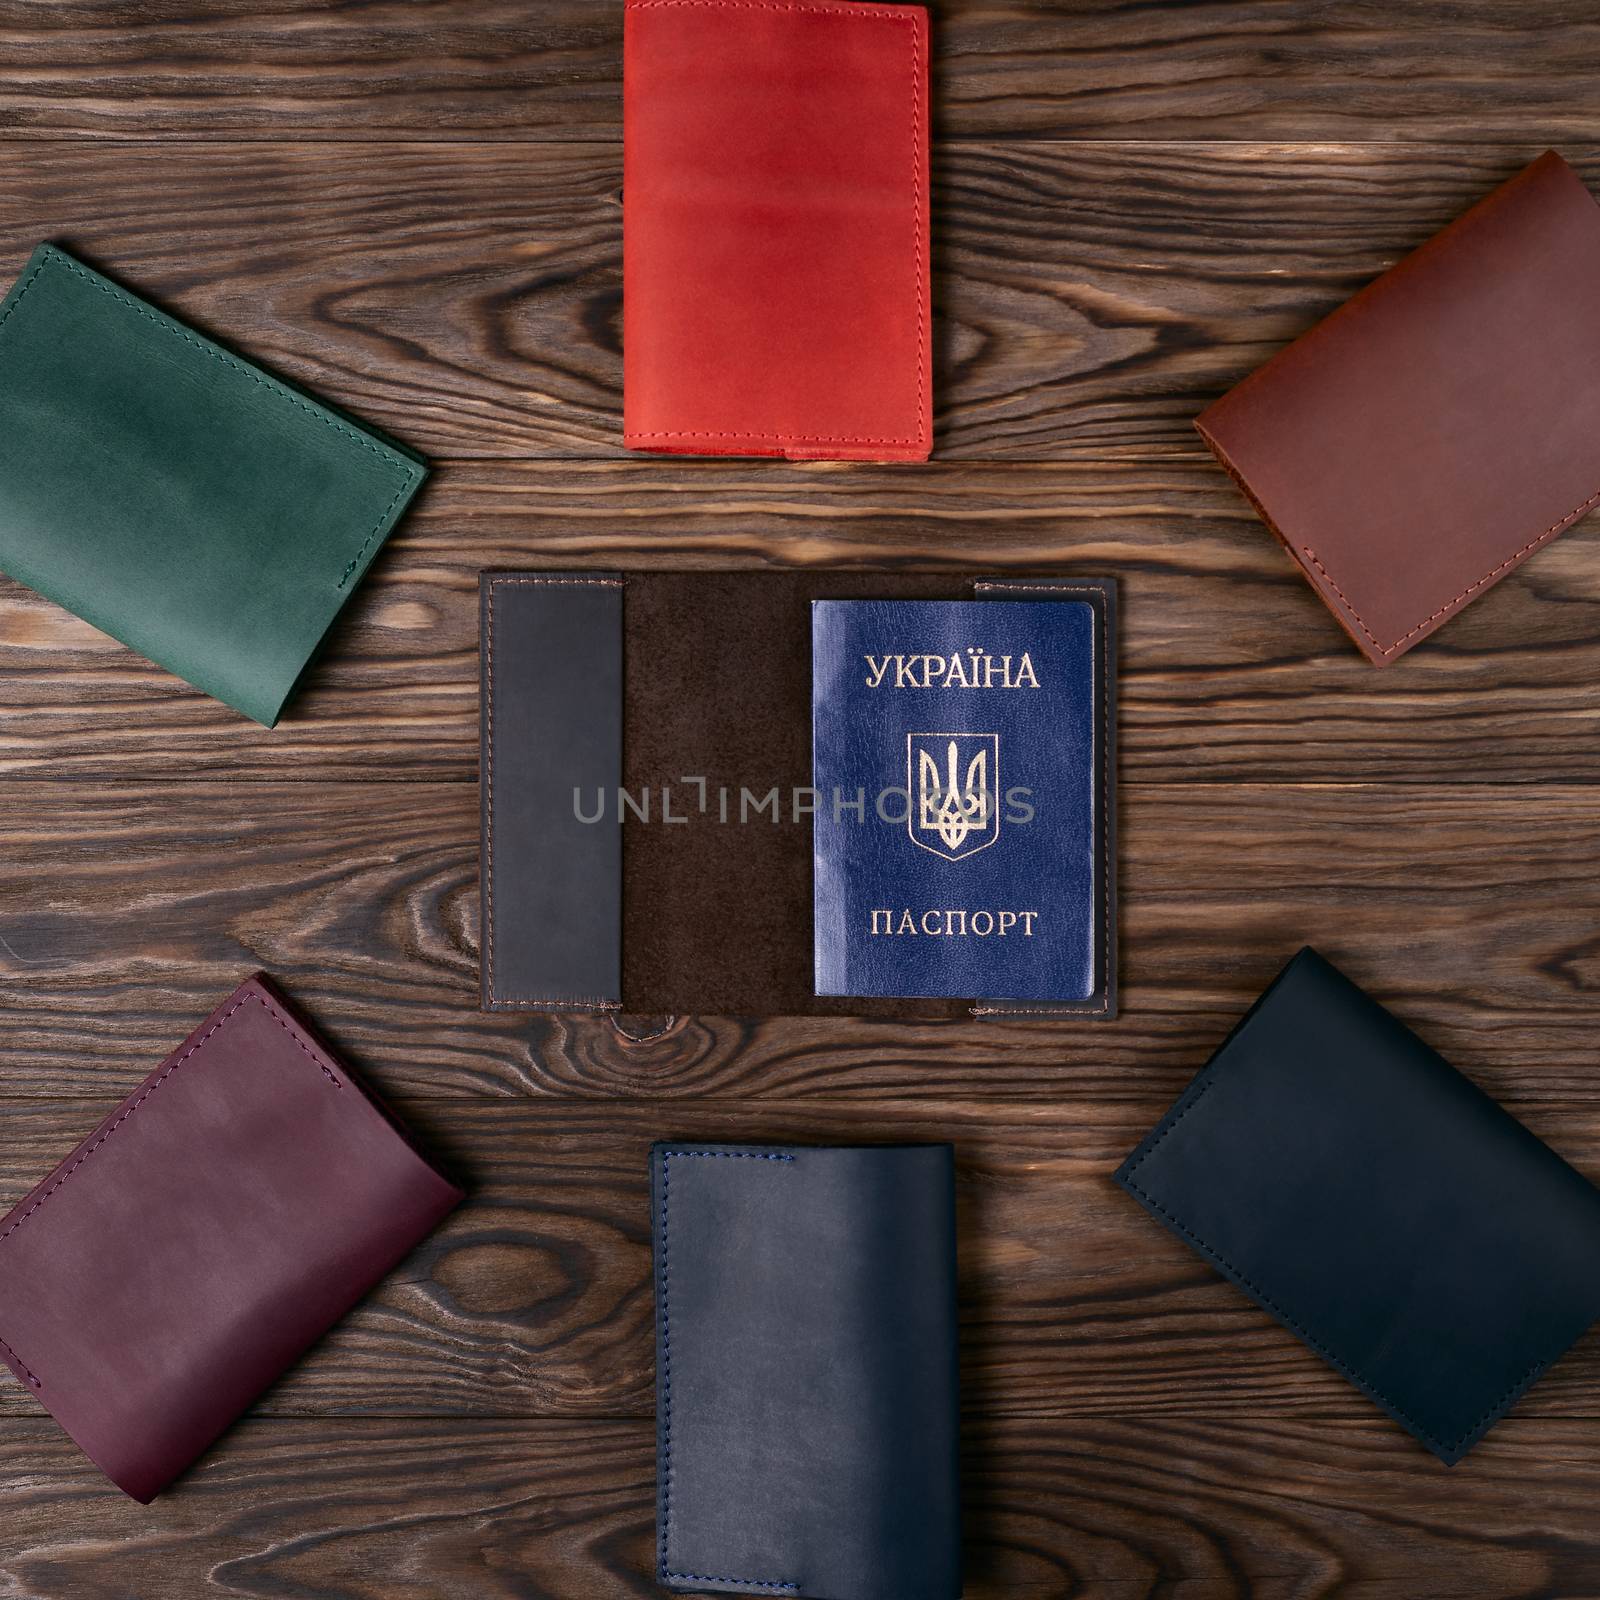 Six handmade leather passport covers around one opened cover on wooden textured background. Up to down view. Stock photo of luxury accessories.